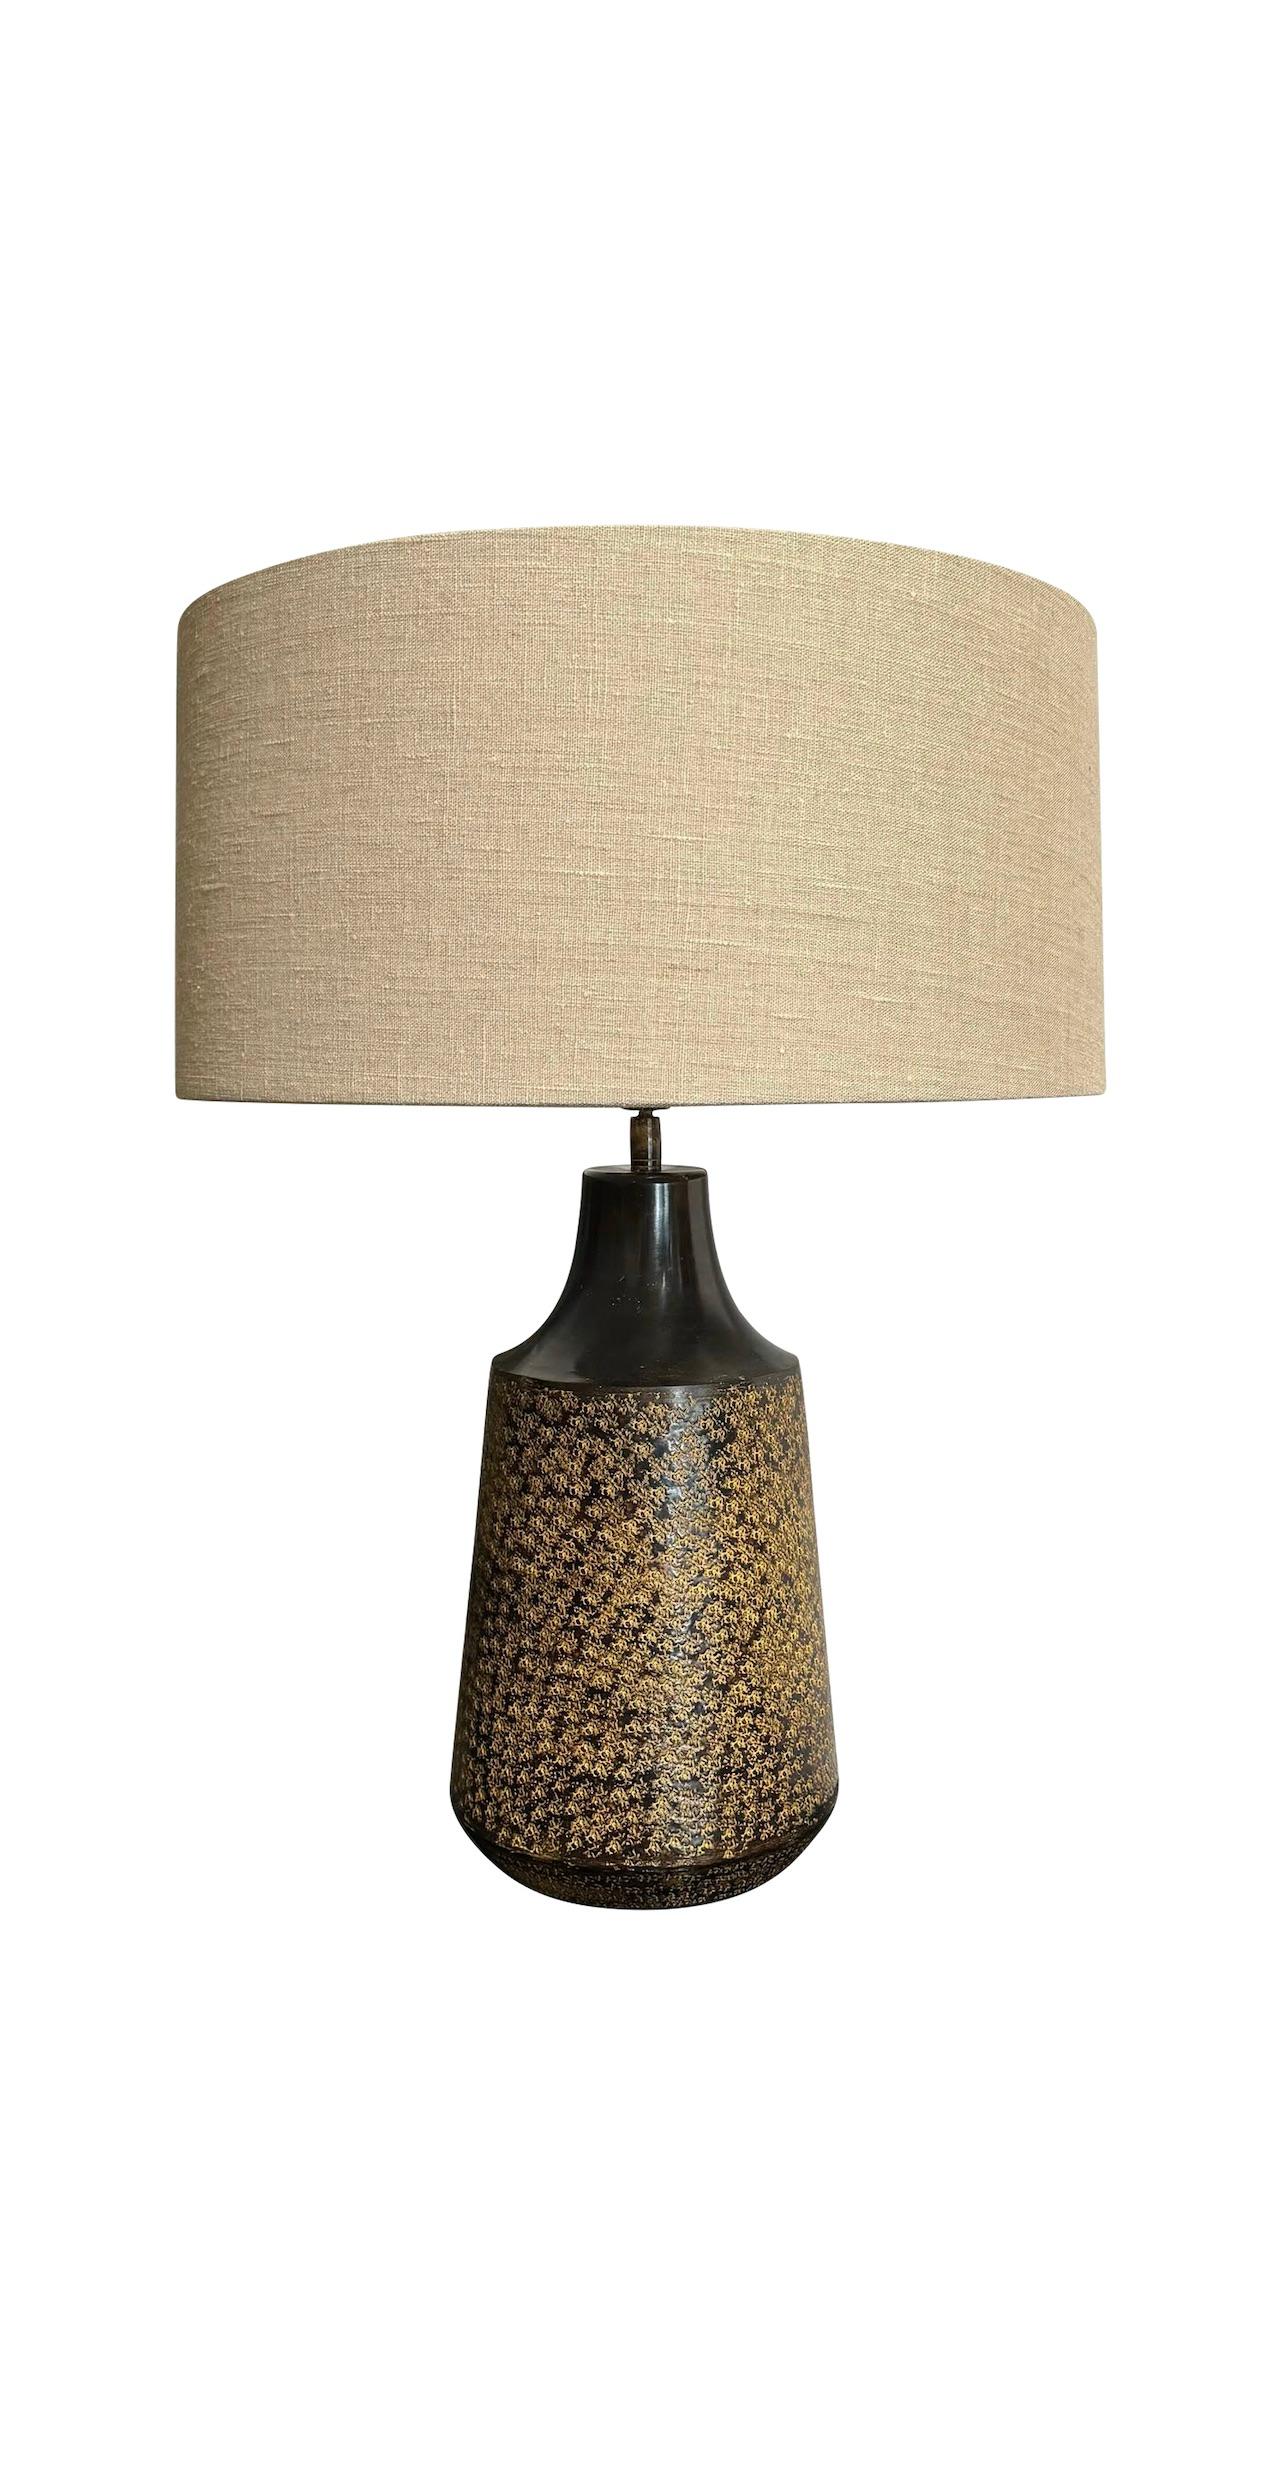 Contemporary Chinese pair textured metal lamps.
Top of base has mottled decorative pattern design.
Belgian linen shades included.
Shade base measures 19.5